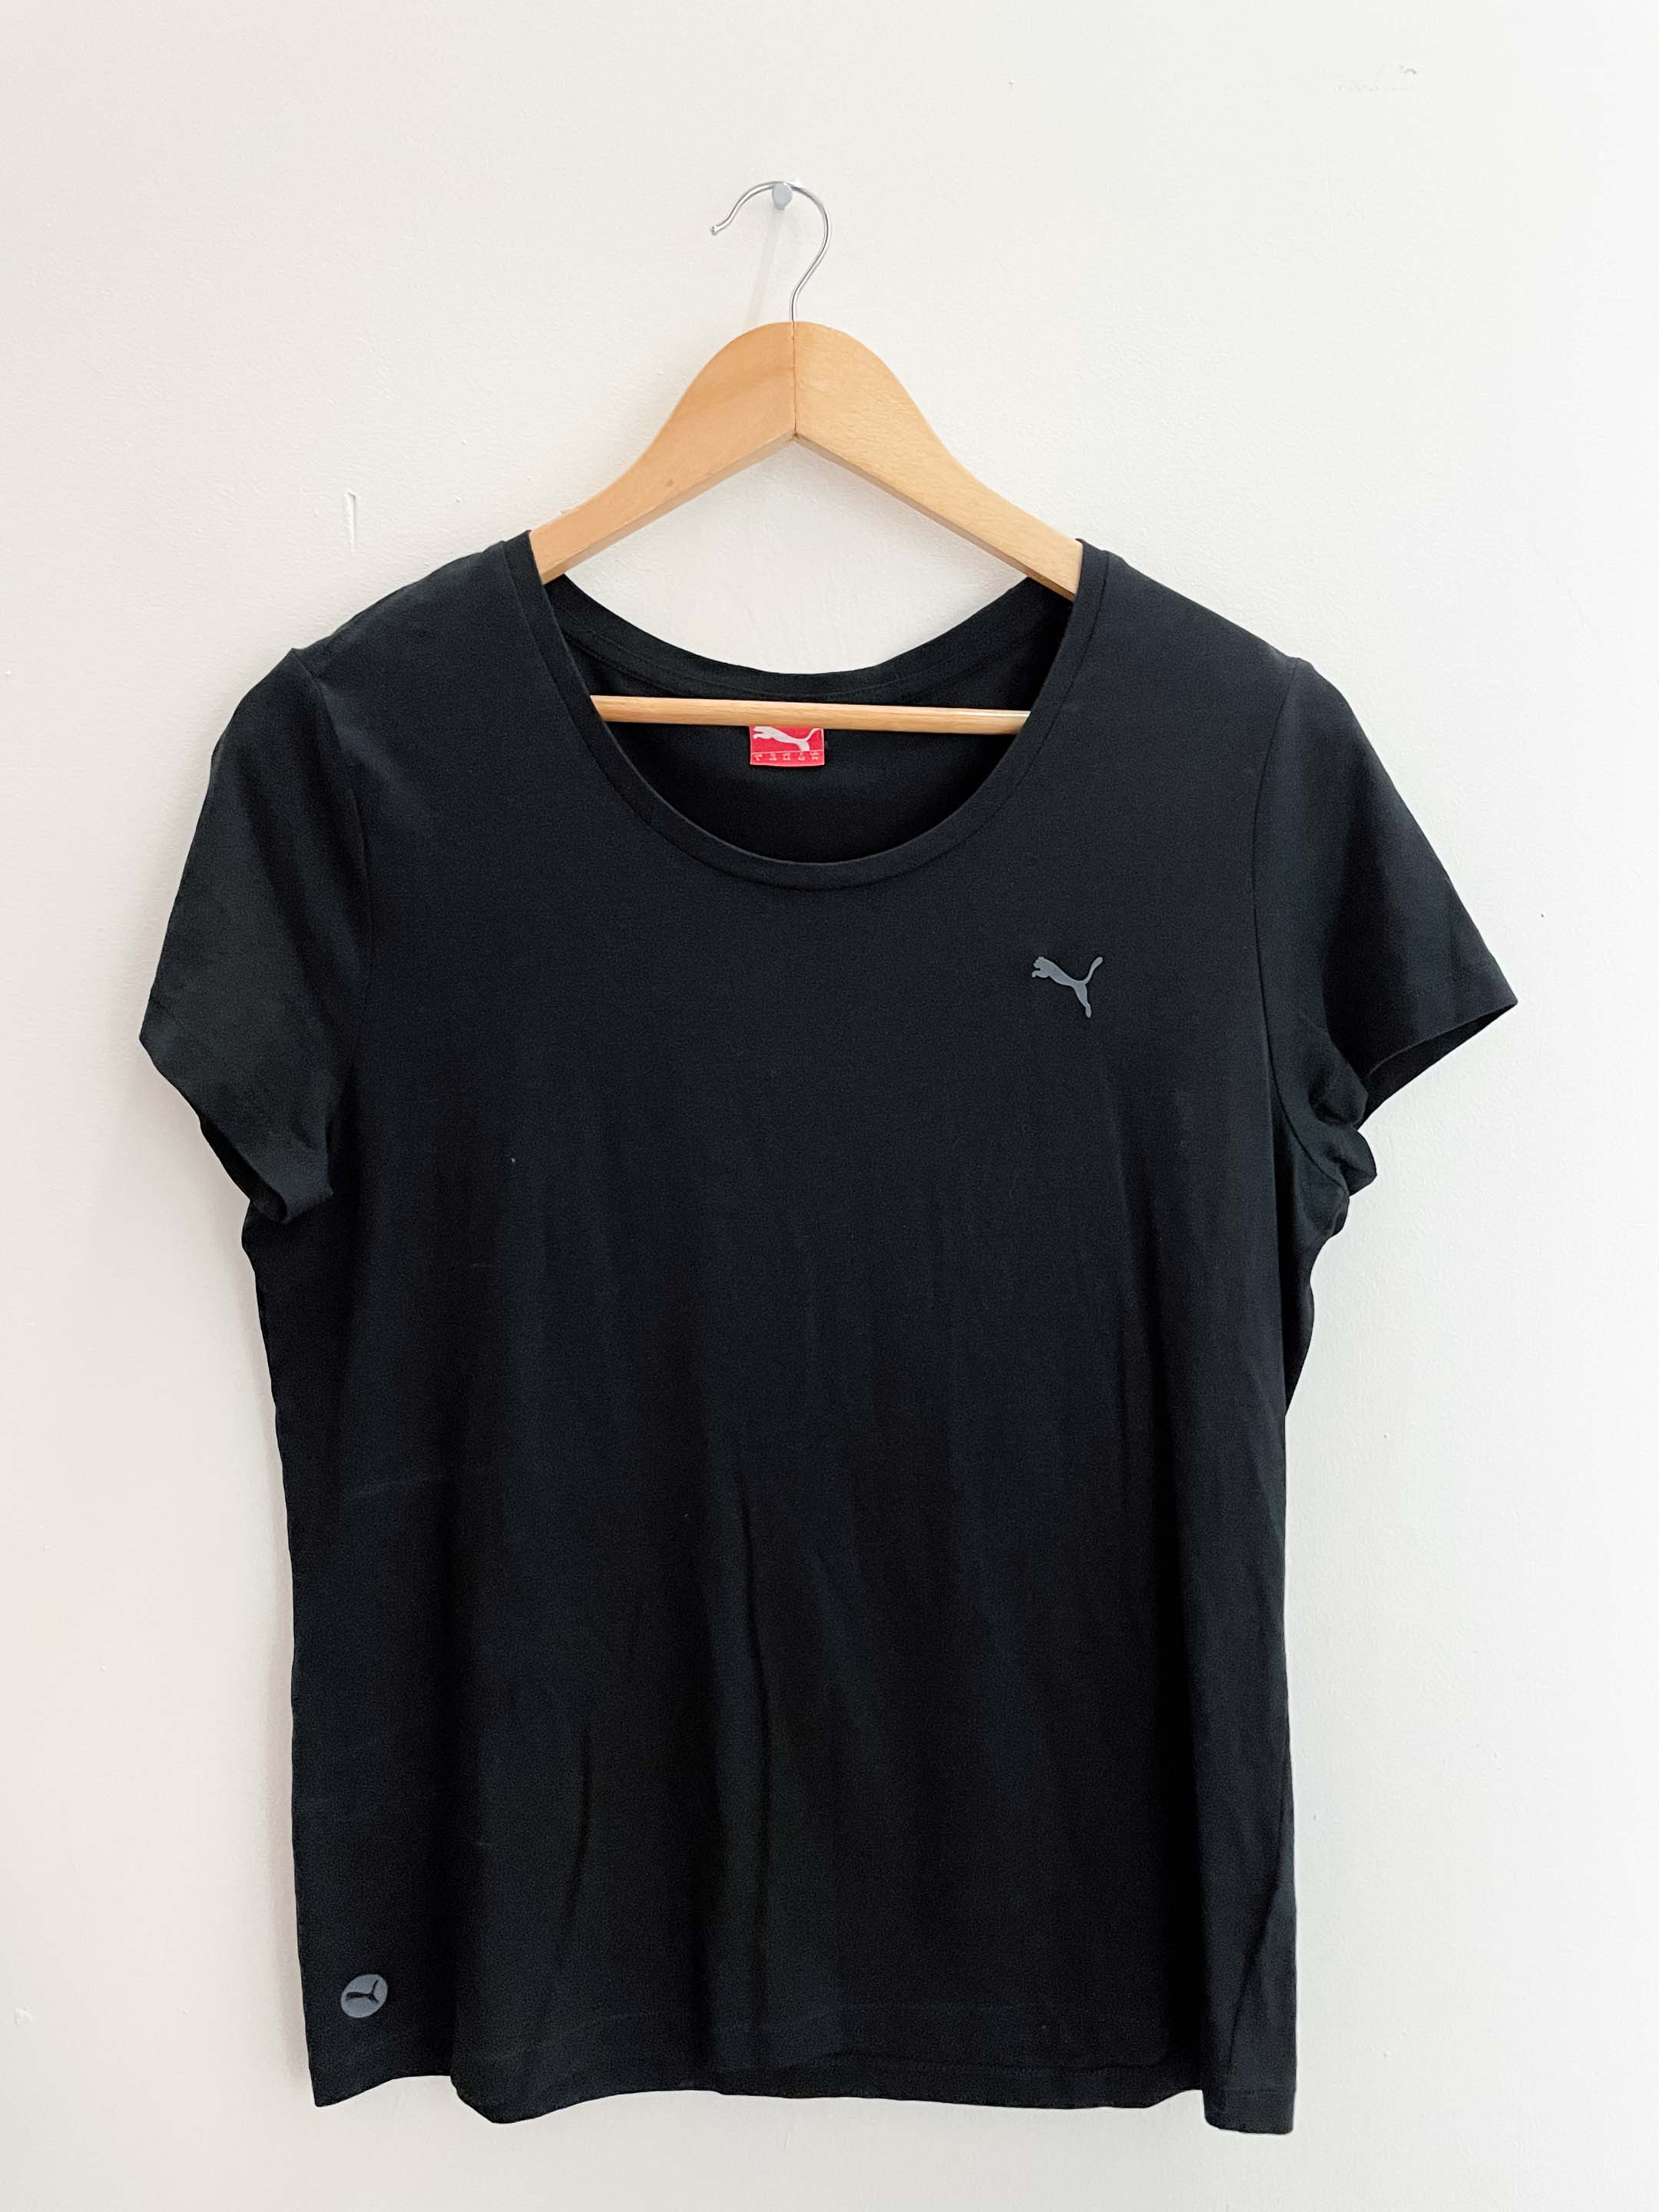 Uniqlo Canada - Introducing the RF T-shirt with the iconic